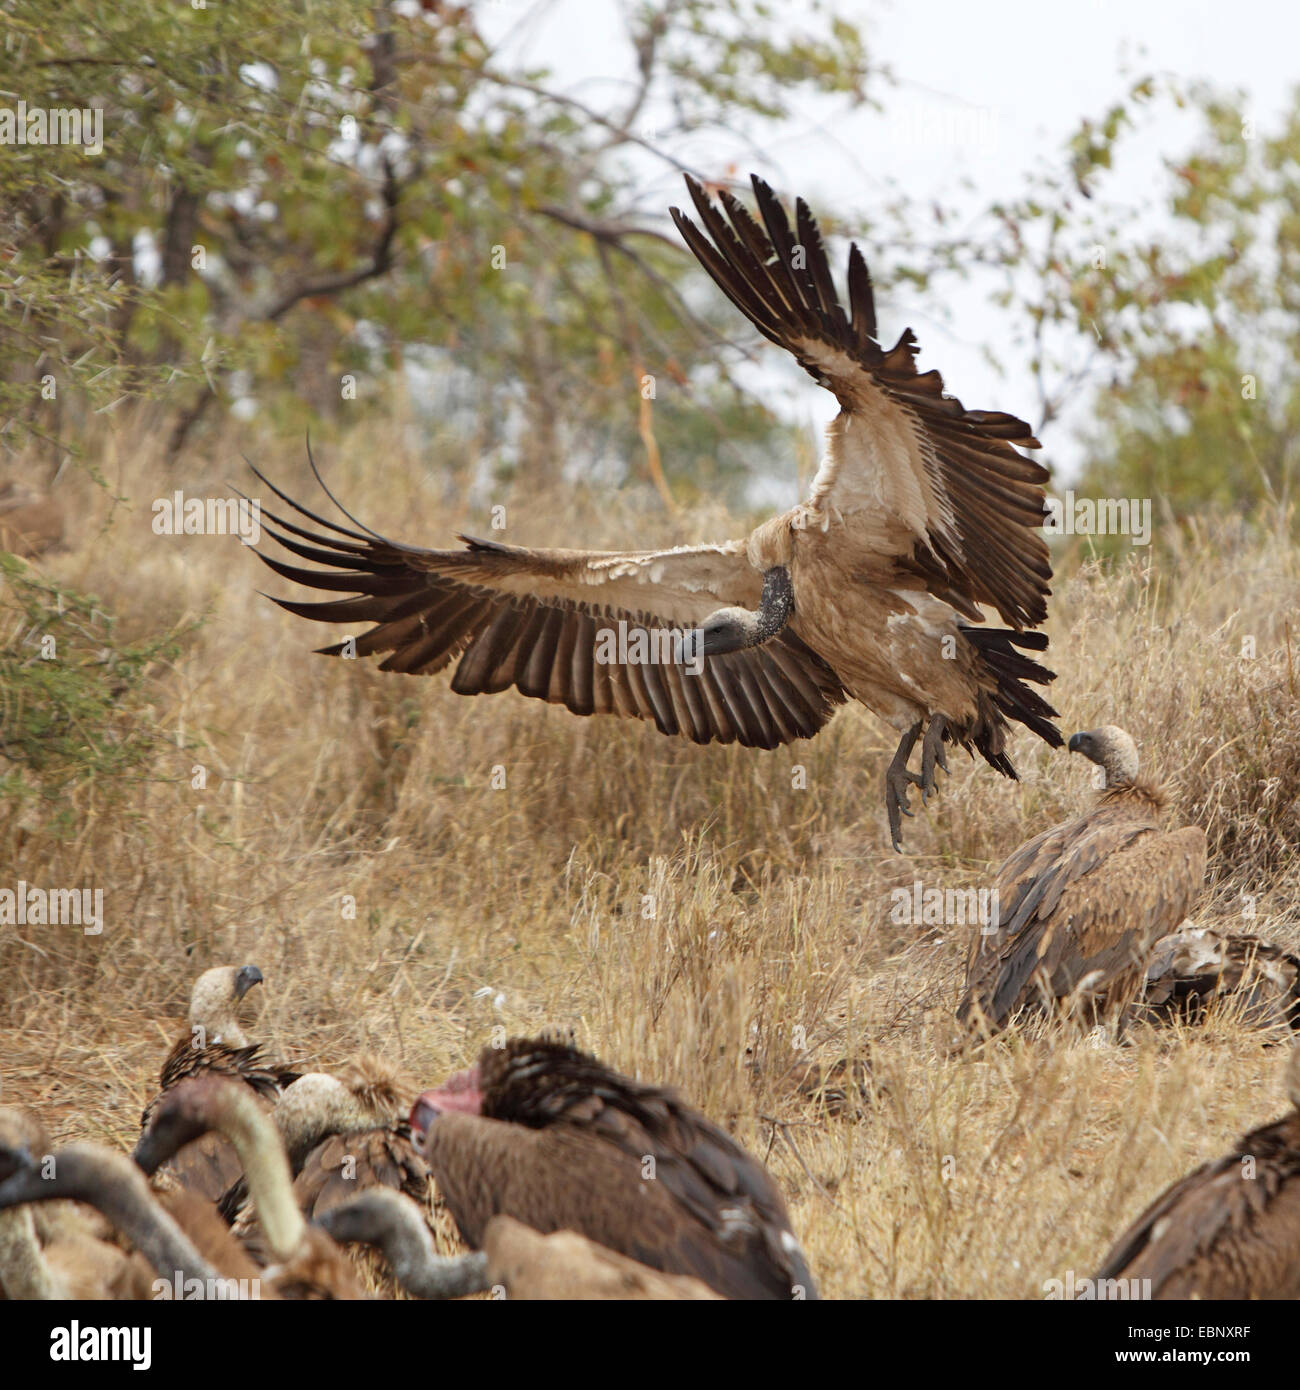 African white-backed vulture (Gyps africanus), landing on carrion, South Africa, Kruger National Park Stock Photo